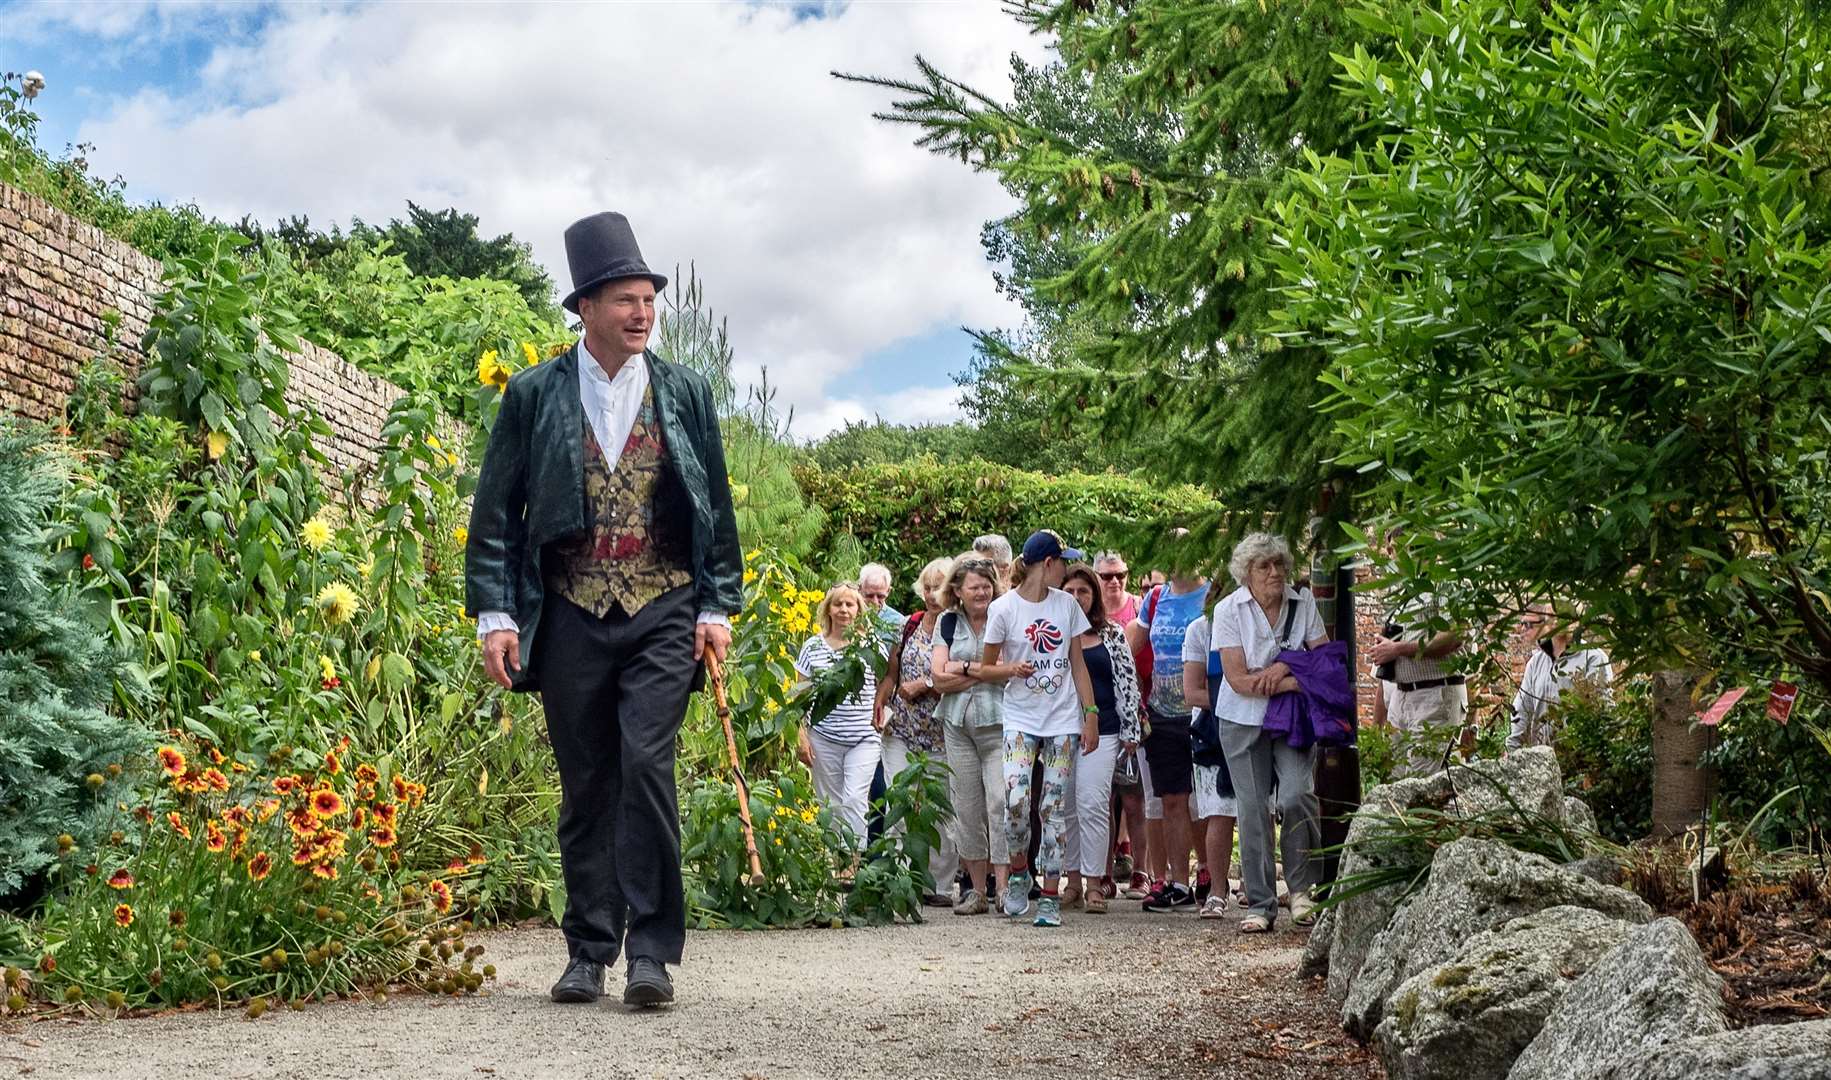 From plant fairs to craft festivals, Lullingstone Castle is putting on lots of fun, family events this summer. Picture: Alan Graham / Lullingstone Castle